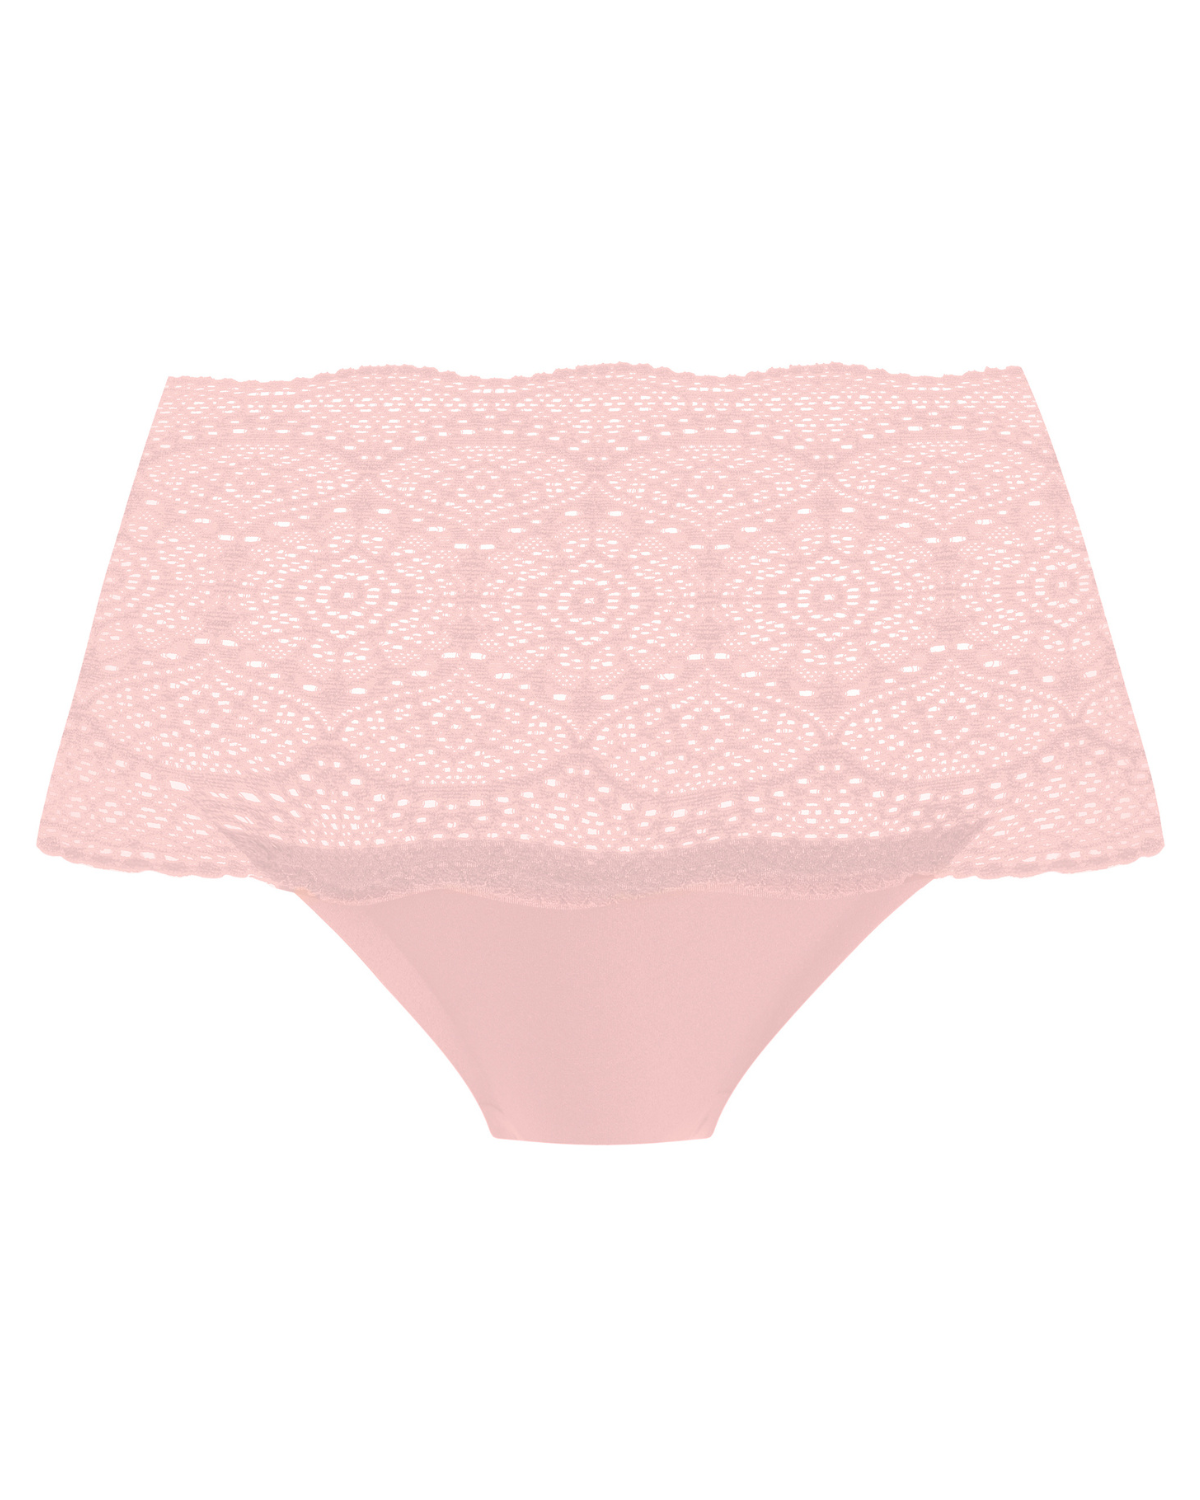 Flat lay of a wide lace band brief panty in beige